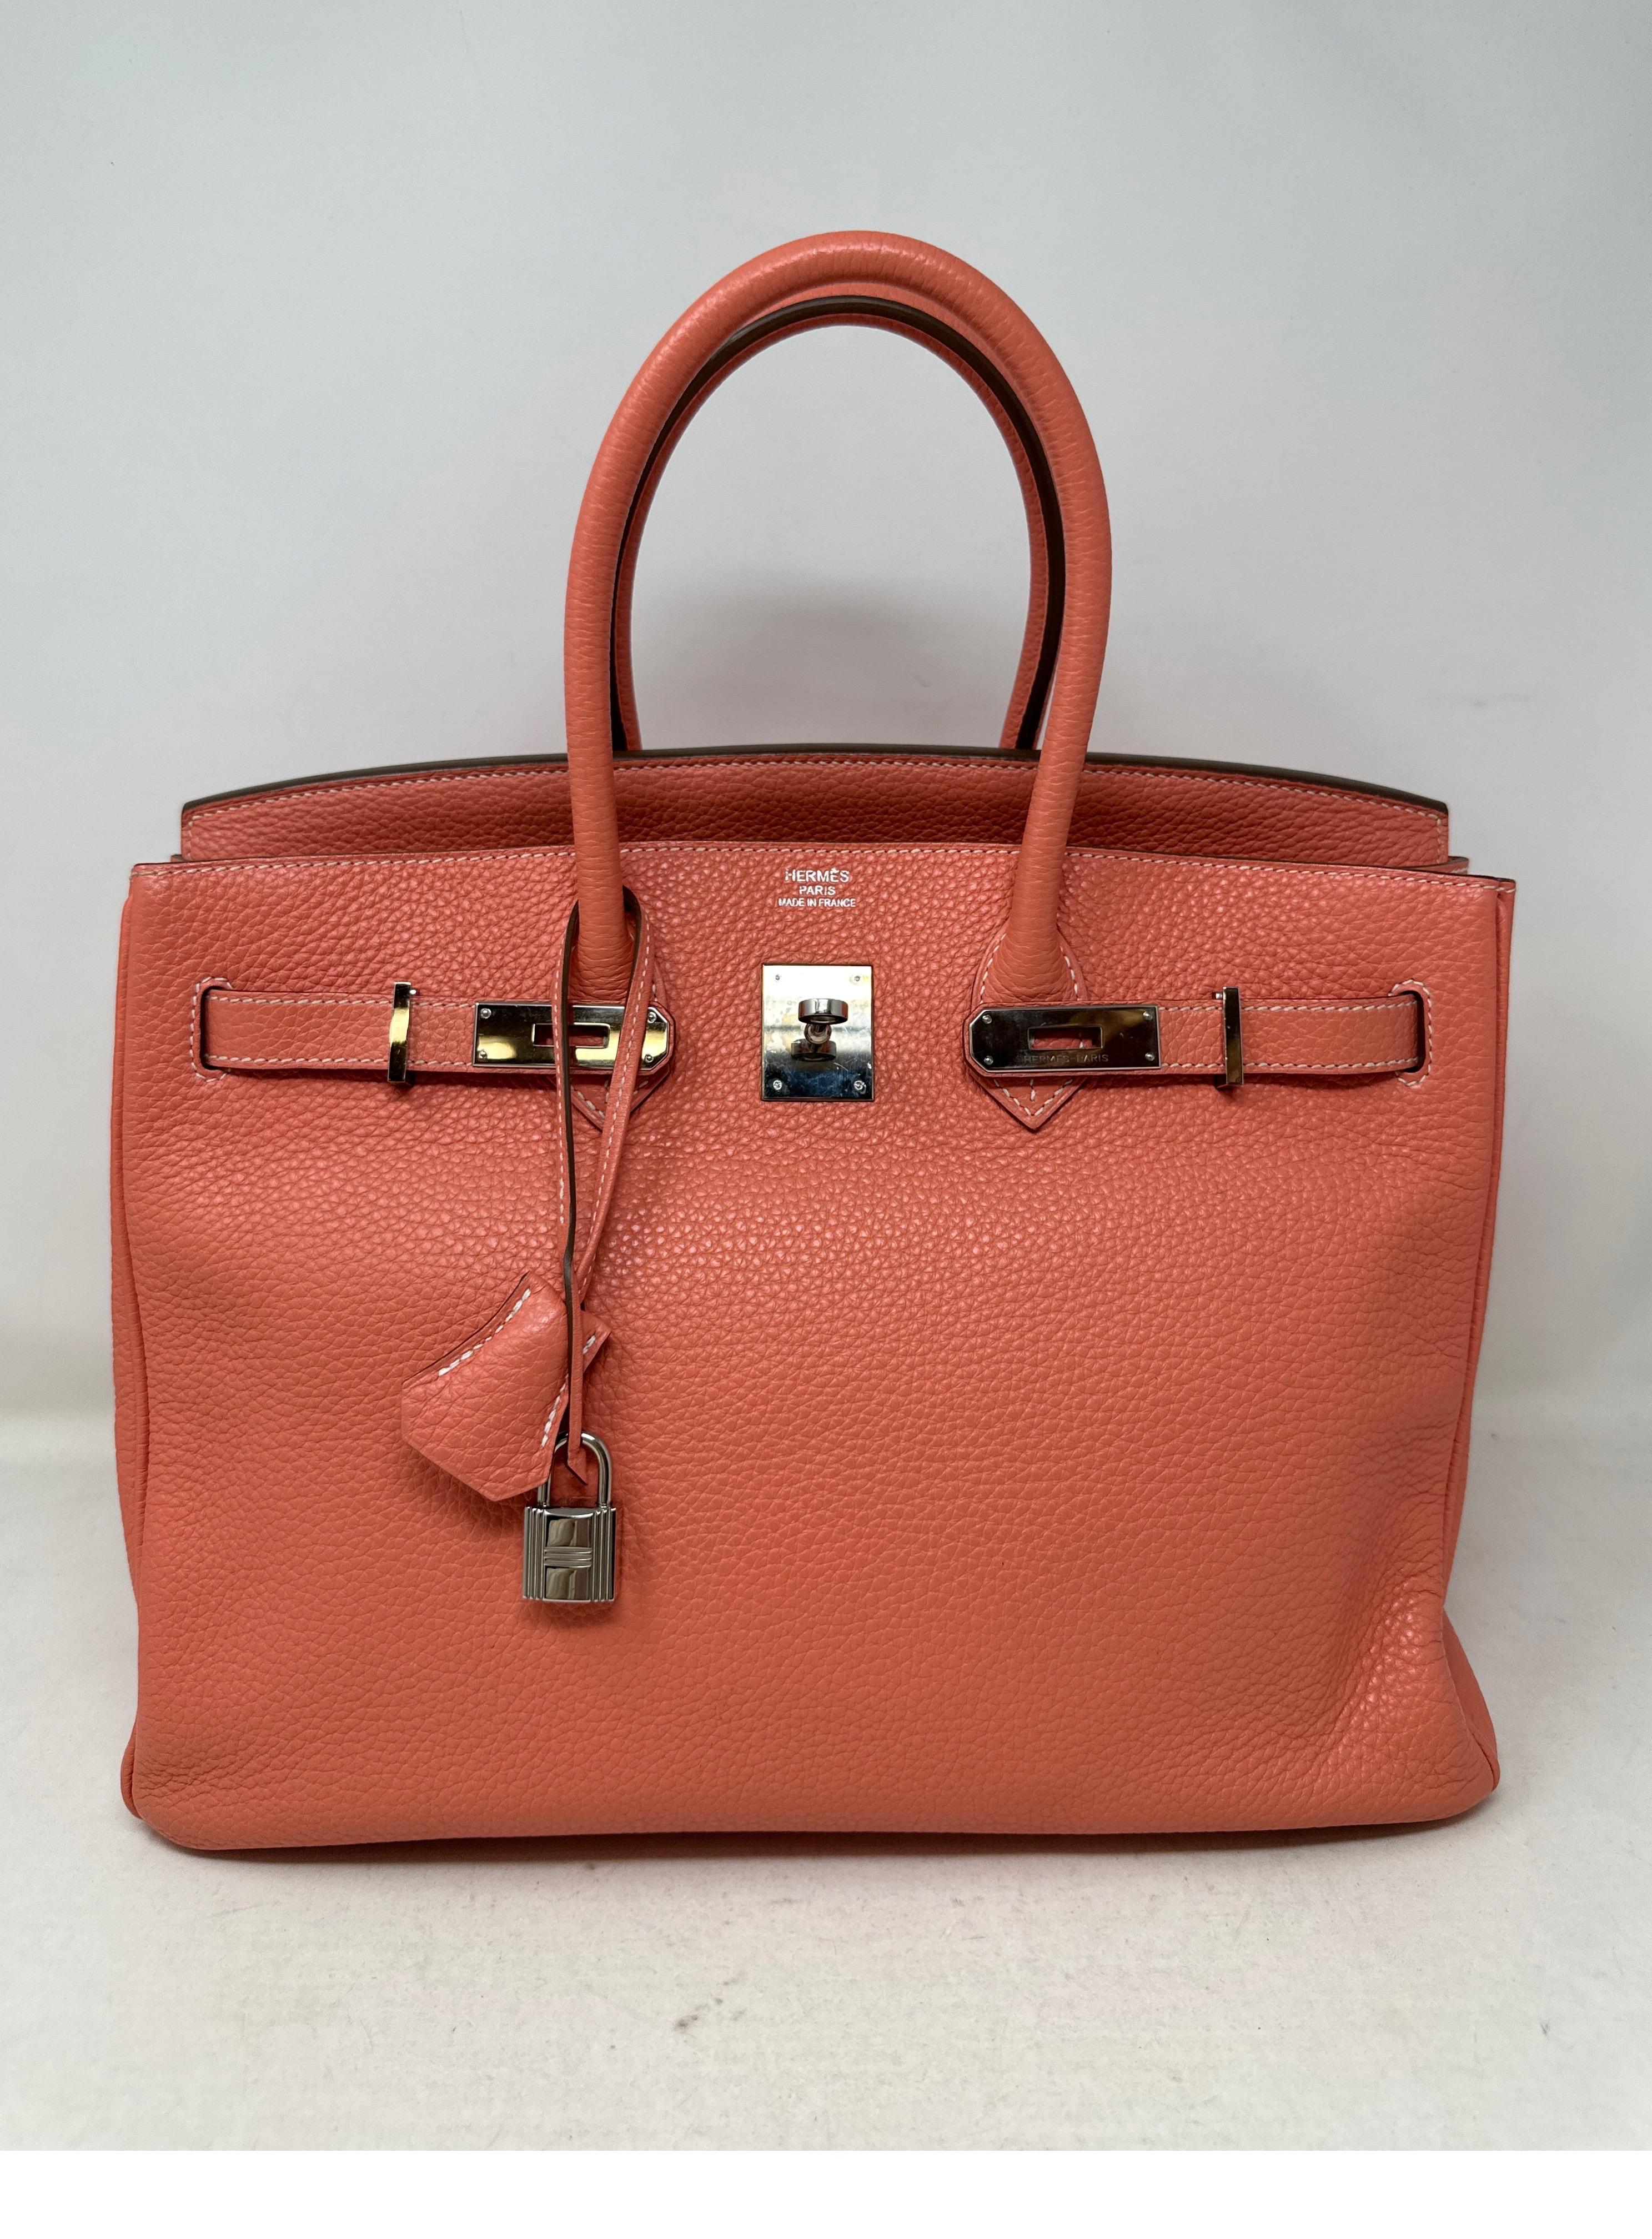 Hermes Crevette Birkin 35 Bag. Salmon pink color. Palladium silver hardware. Pretty pink color. Clemence leather. Interior is clean. Excellent condition. Includes clcohette, lock, keys, and dust bag. Guaranteed authentic. 